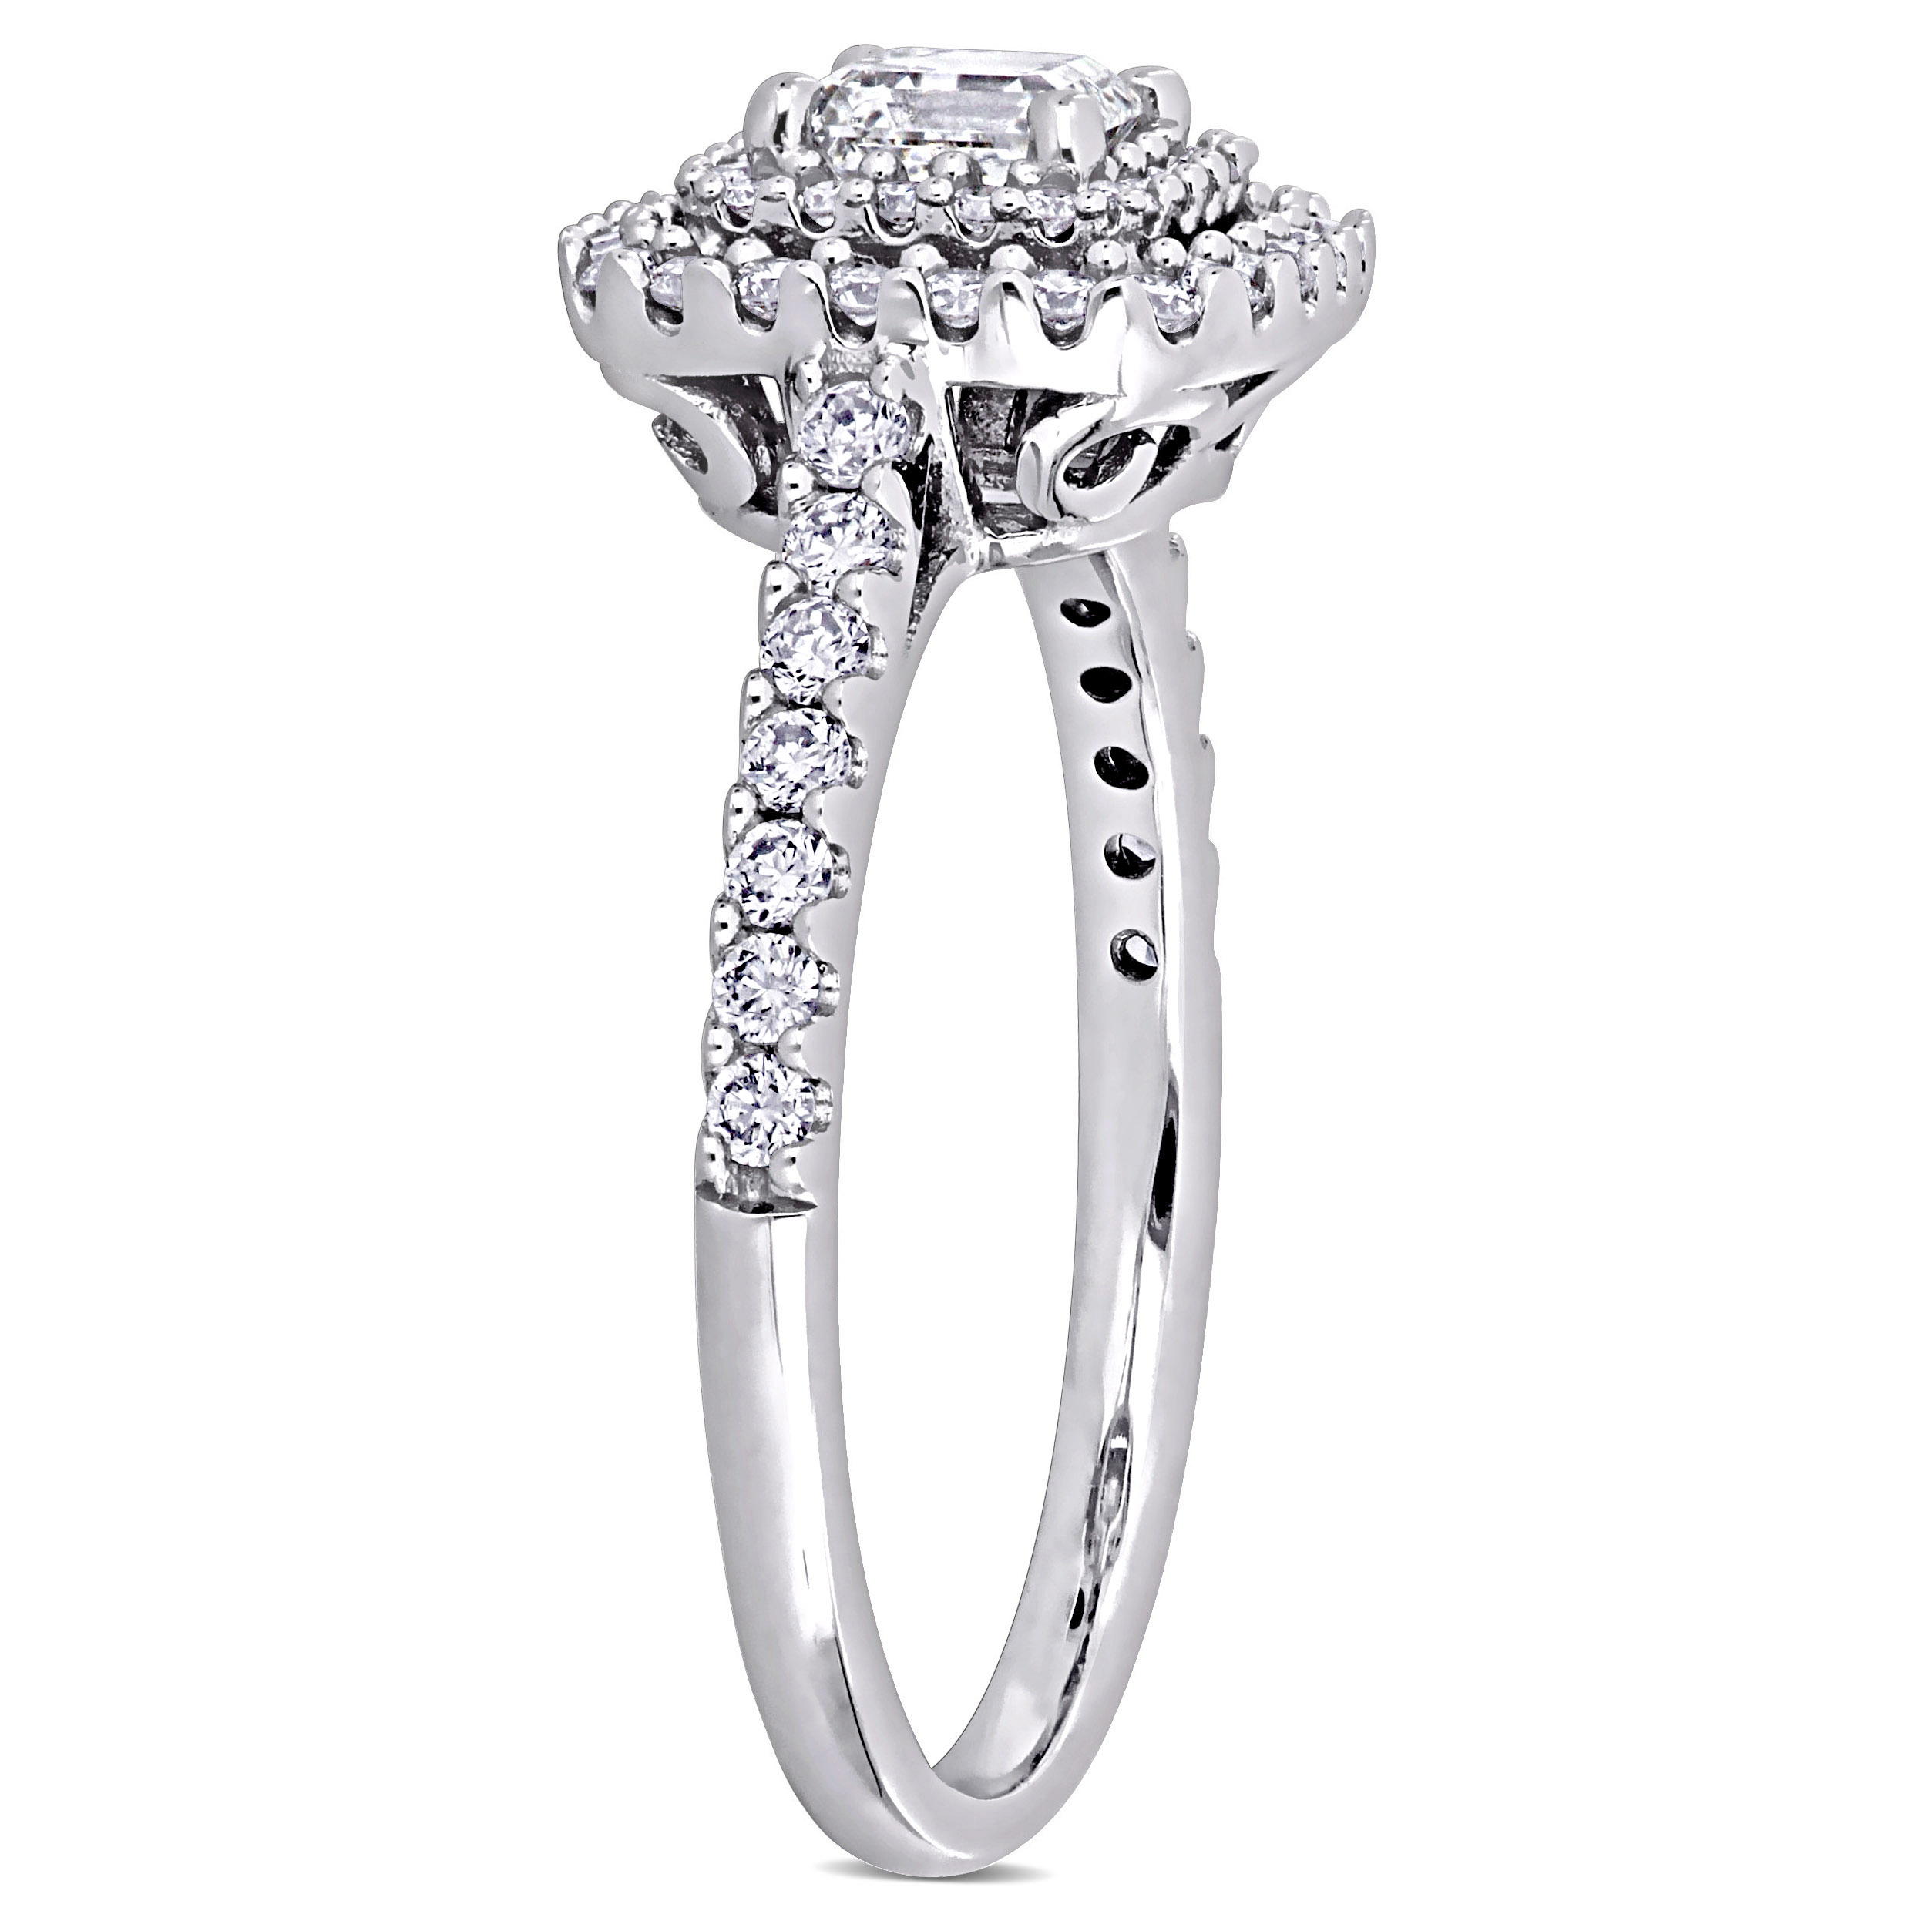 1 CT TW Asscher & Round Diamond Double Halo Engagement Ring in 14k White Gold